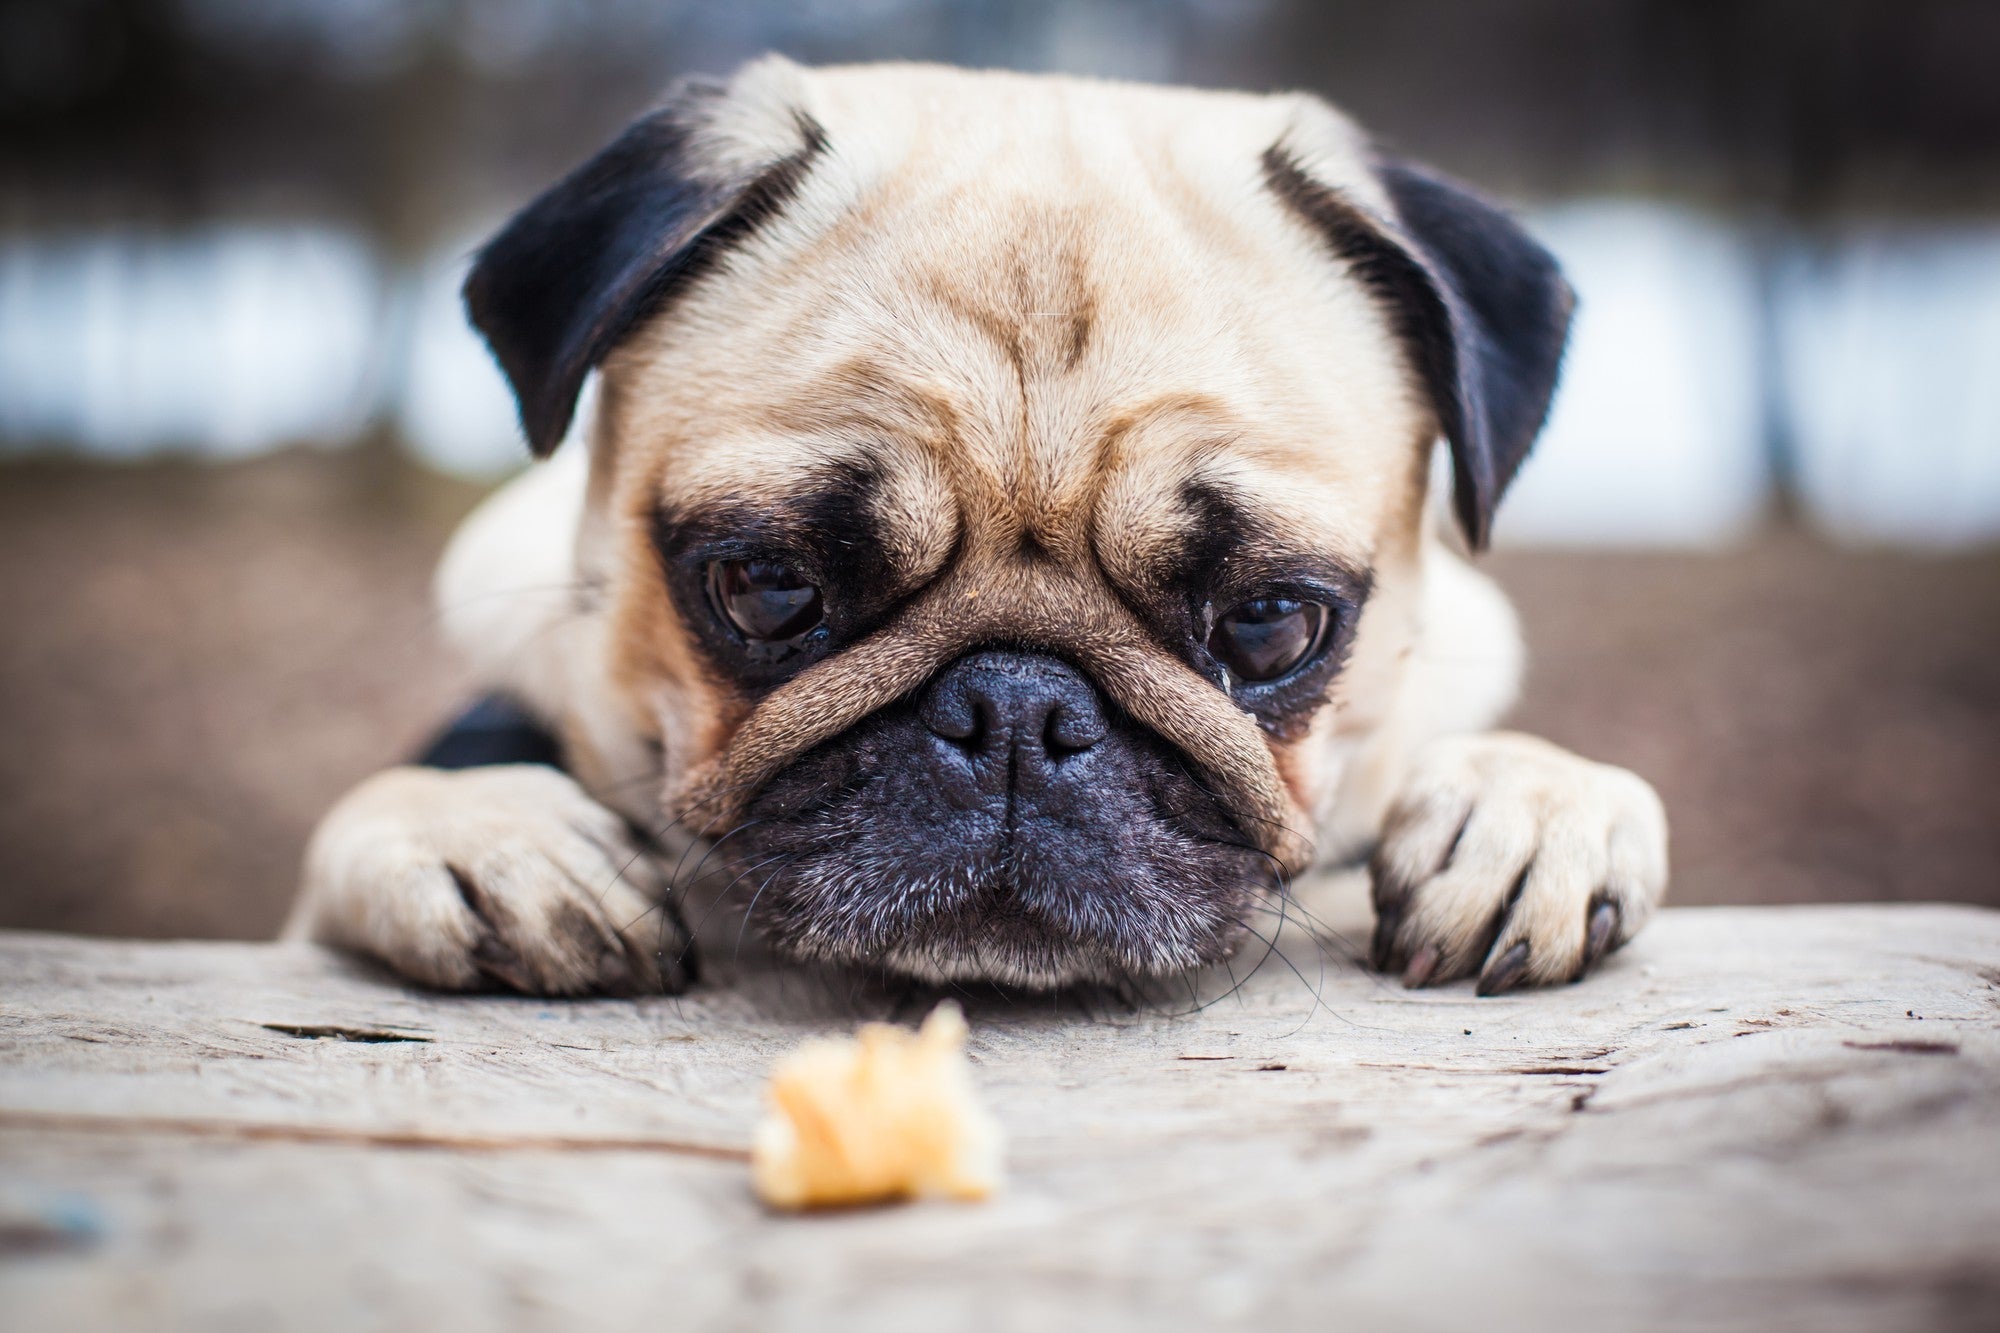 What Should I Do if My Dog Eats Something They Shouldn't Have? - Sweetie